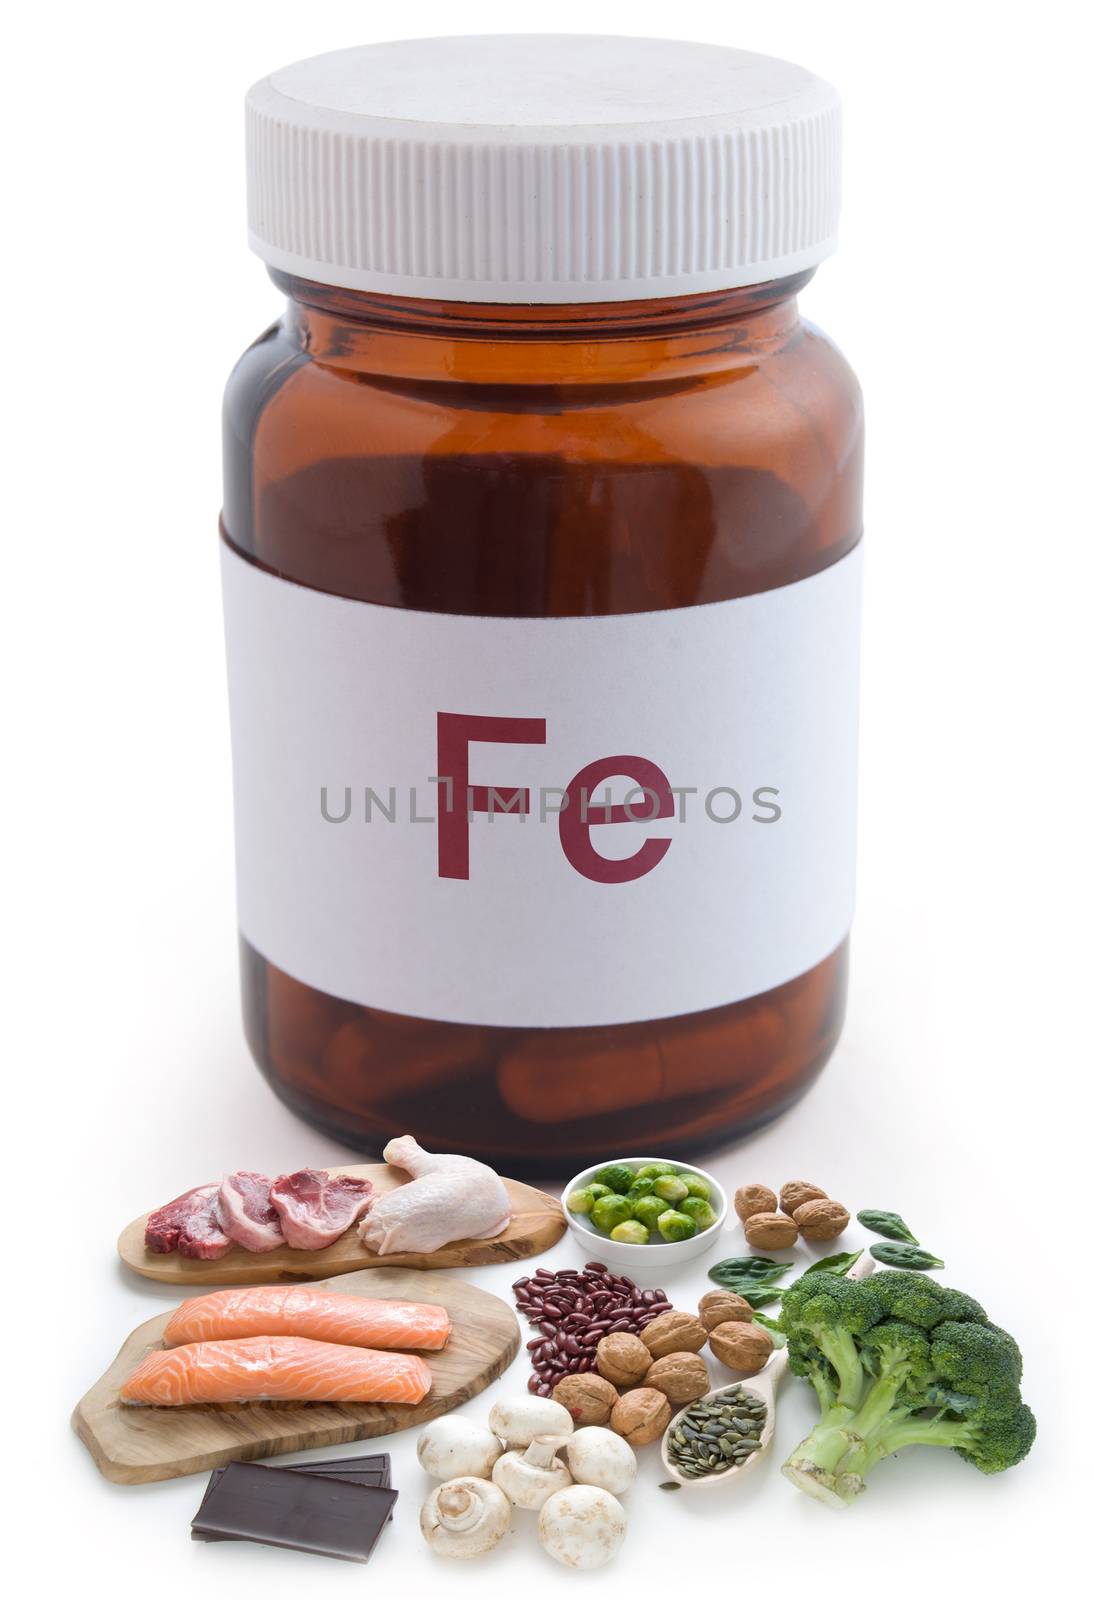 Iron rich foods next to a pill jar over a white background